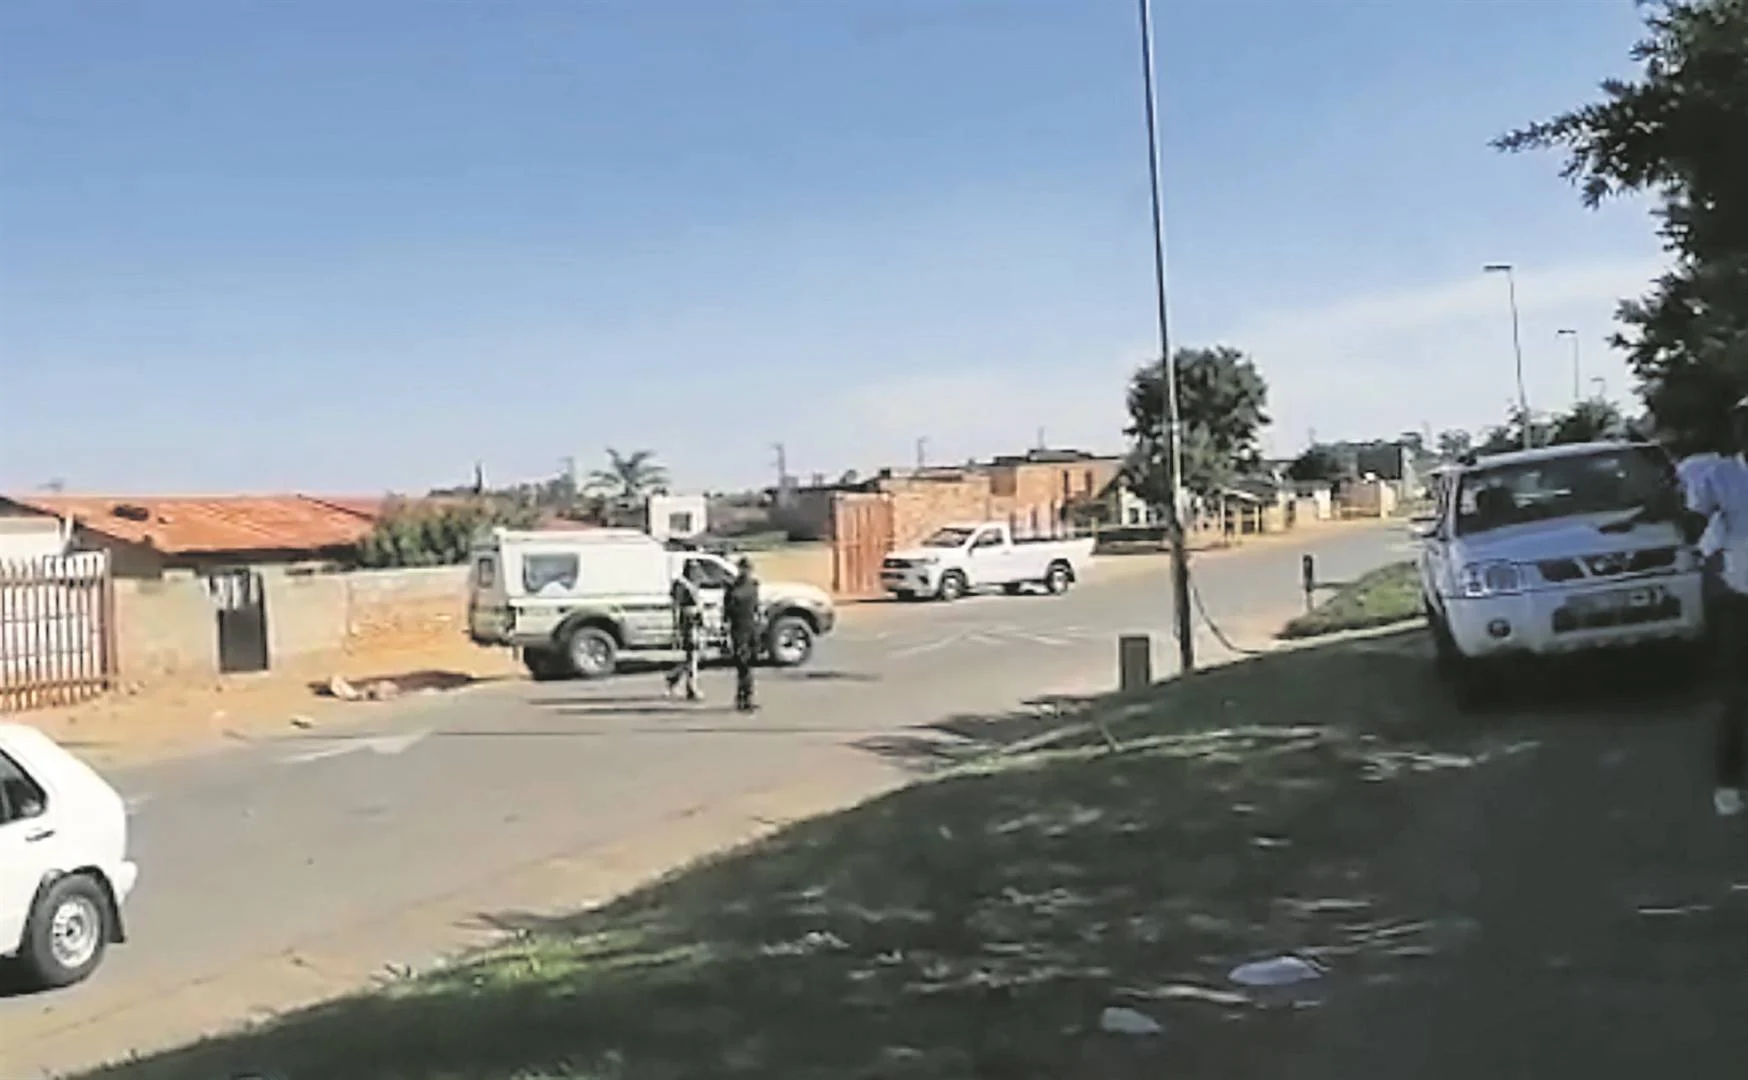 Police at the scene of the shooting incident in Tembisa.